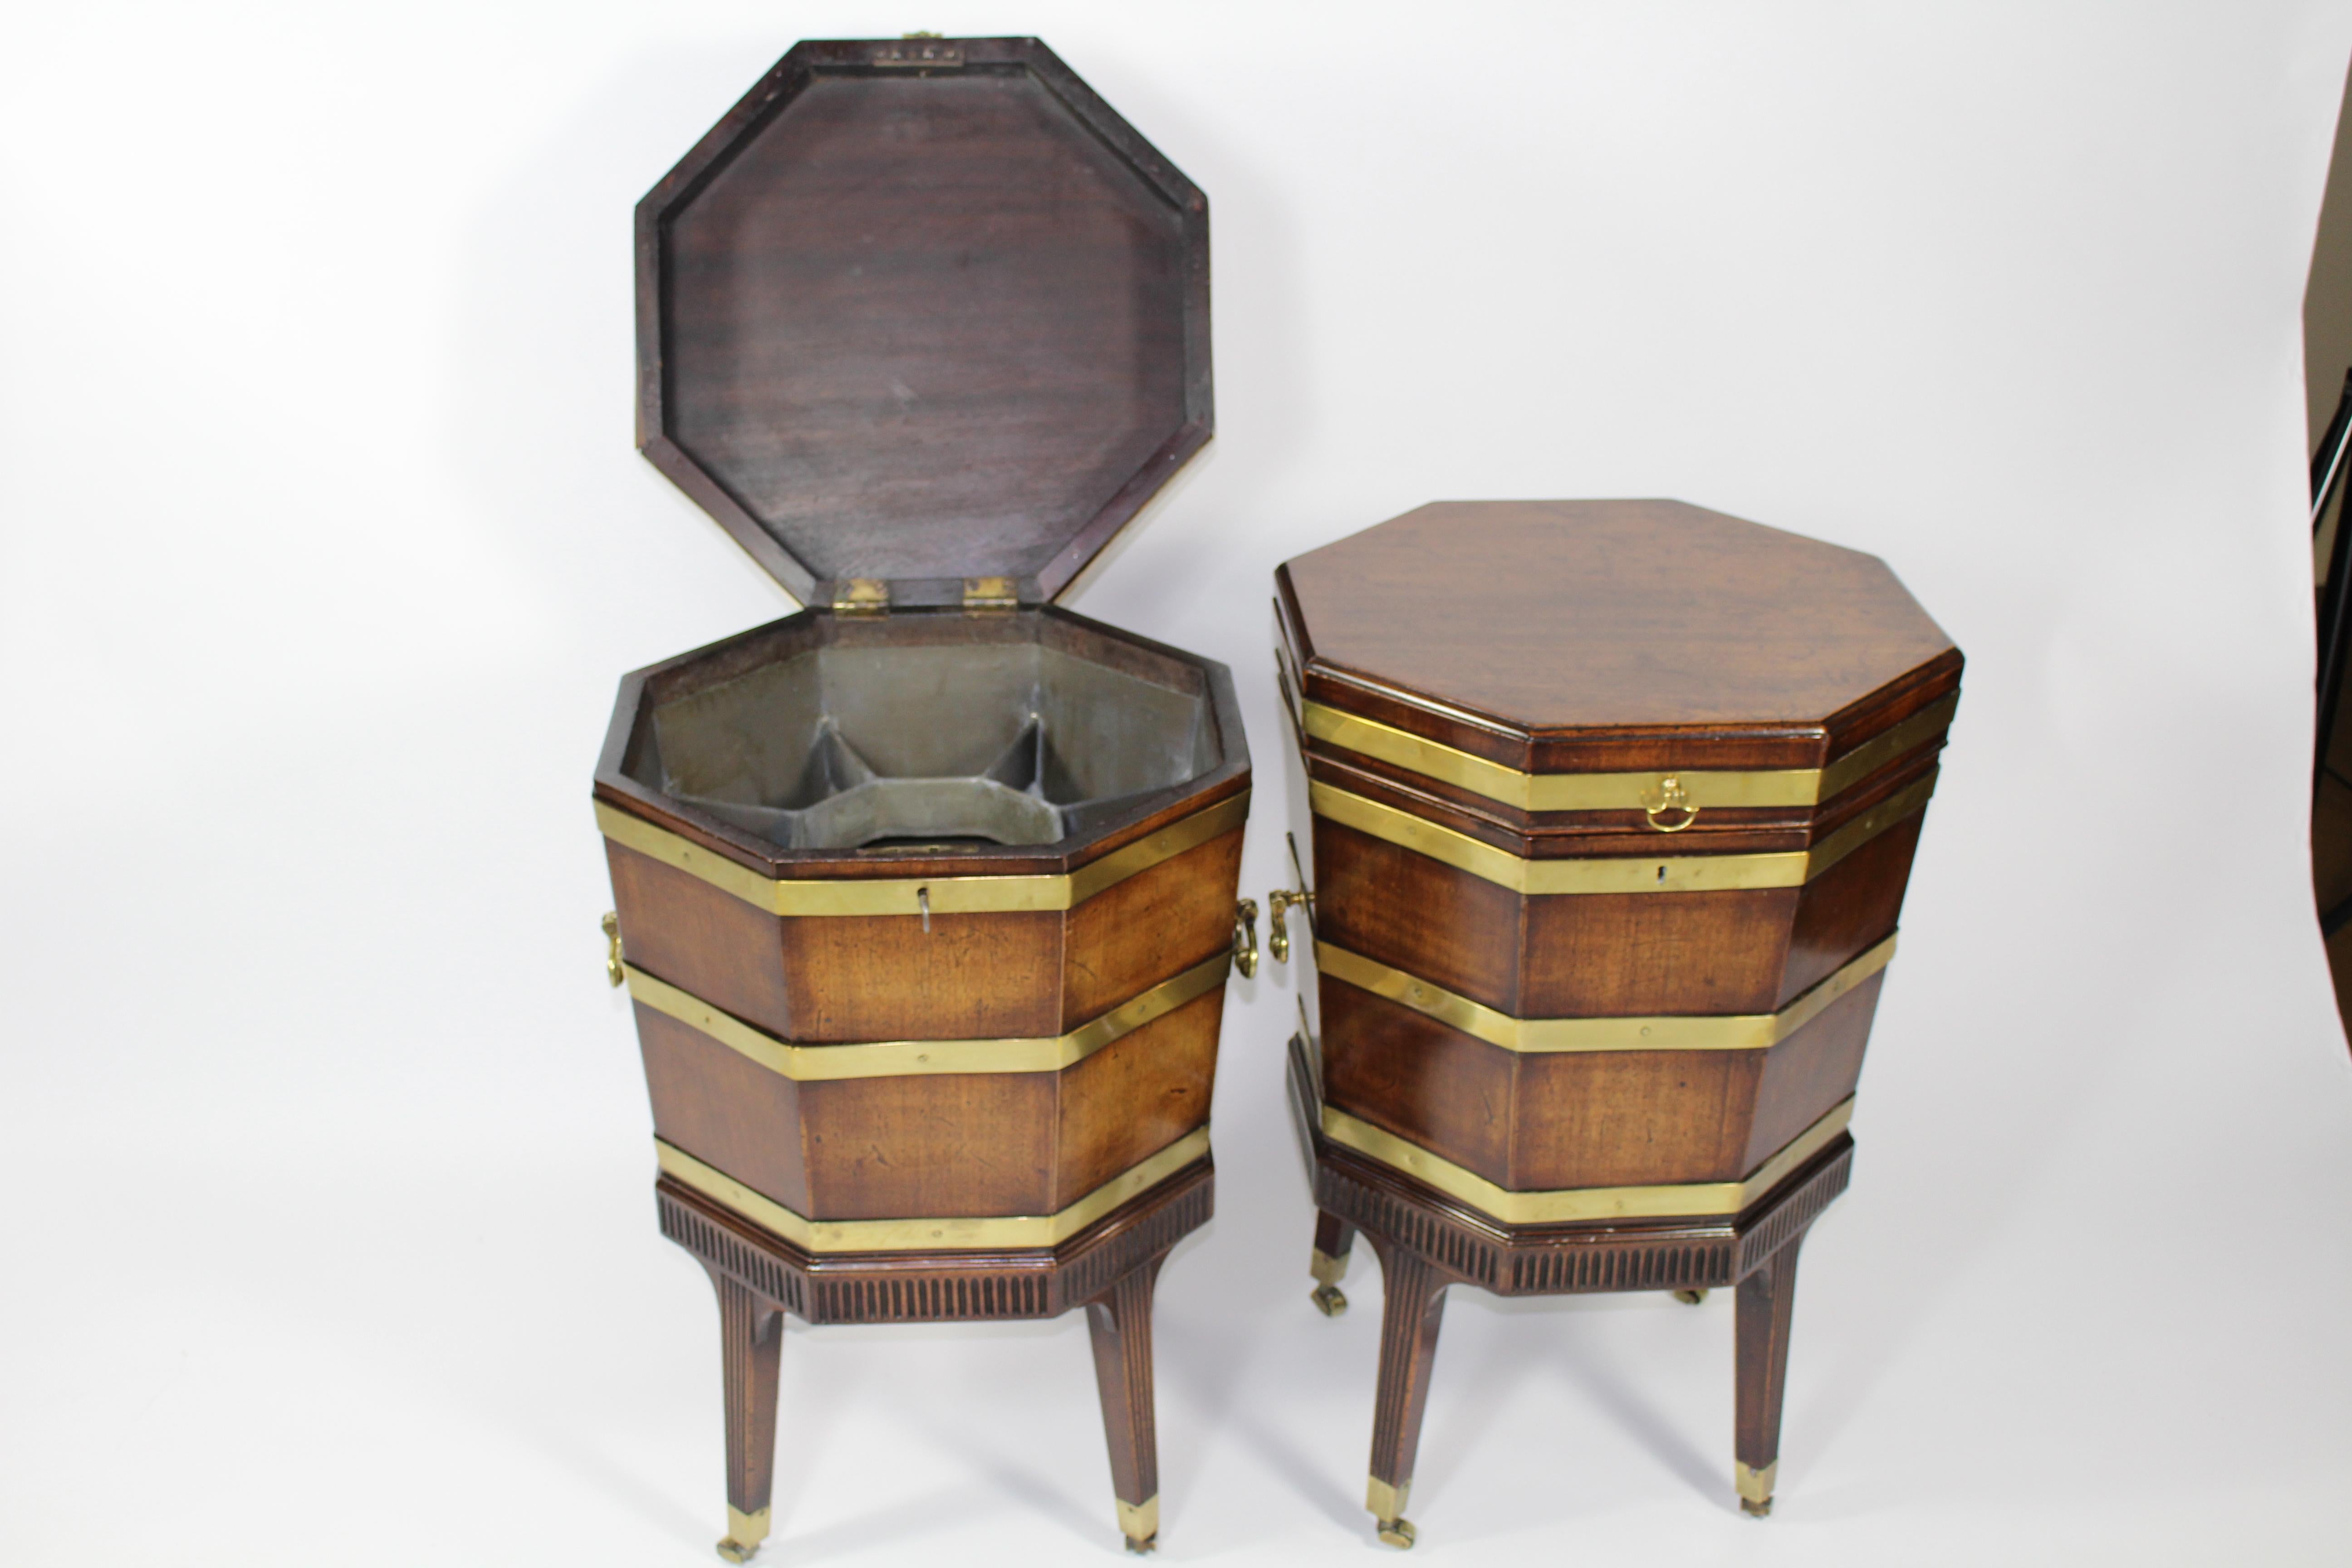 Georgian Rare pair of 18th century mahogany wine coolers/cellerets For Sale